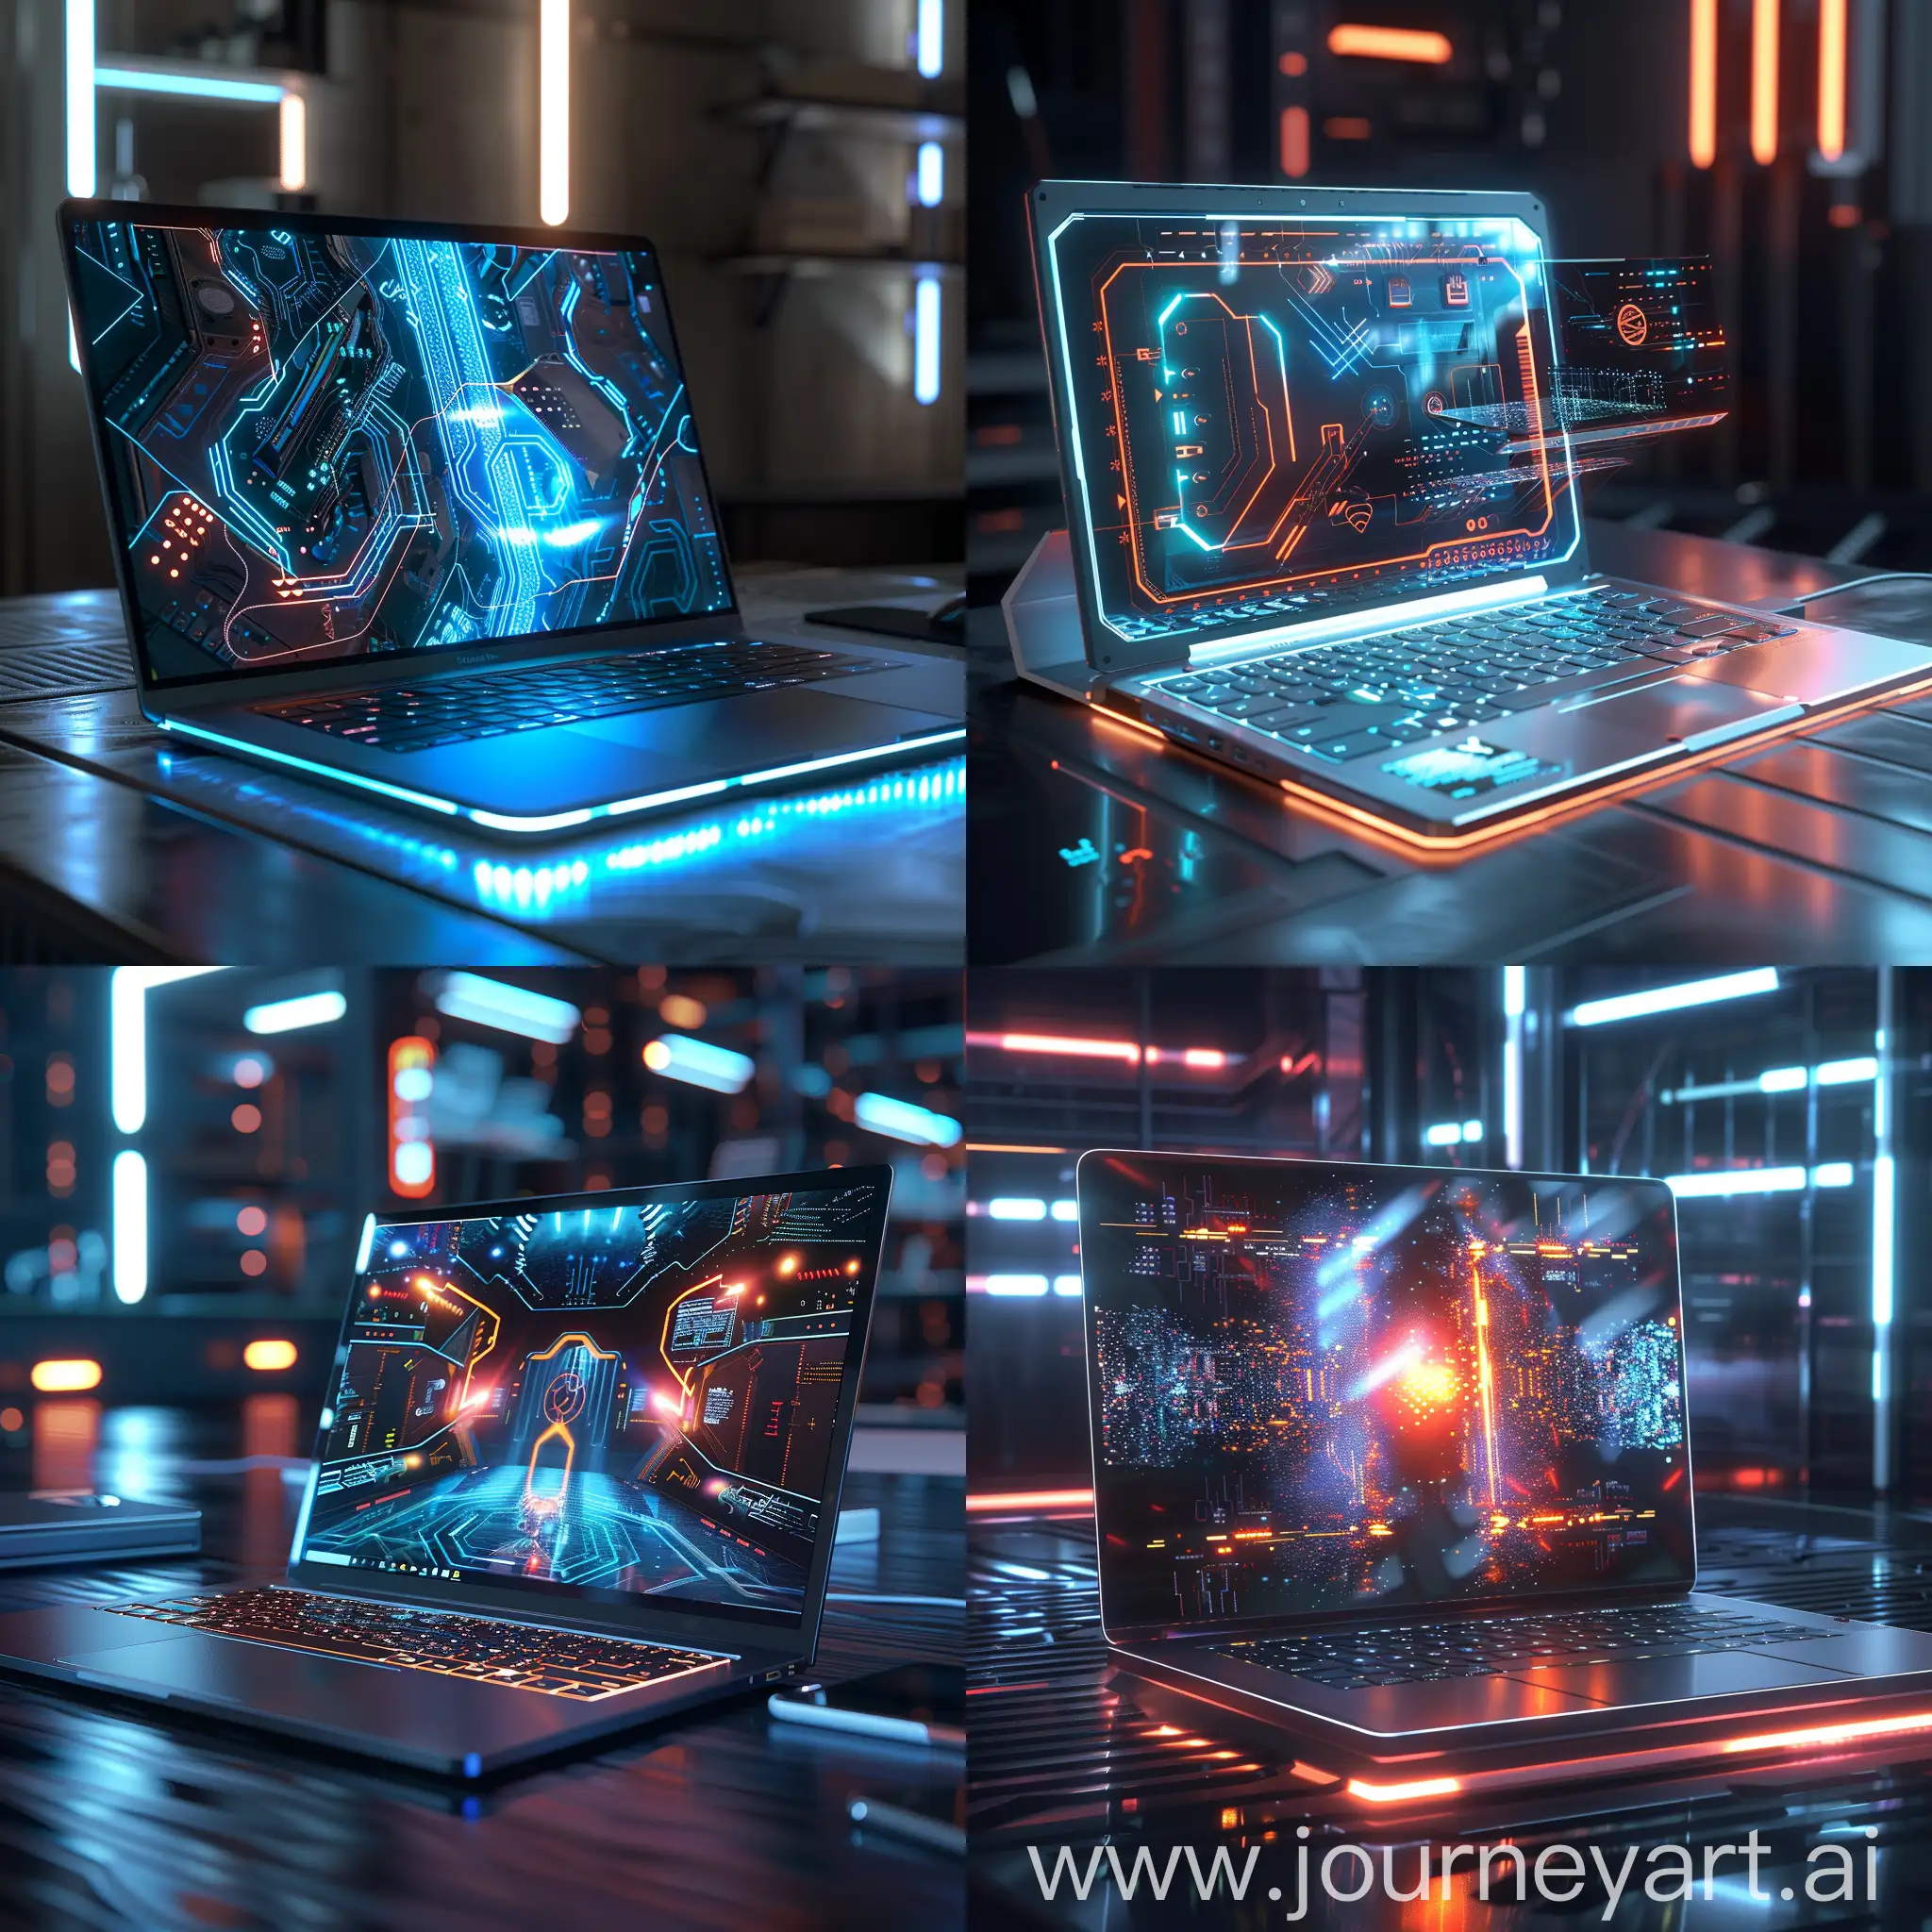 Futuristic-Holographic-Laptop-with-Advanced-Technology